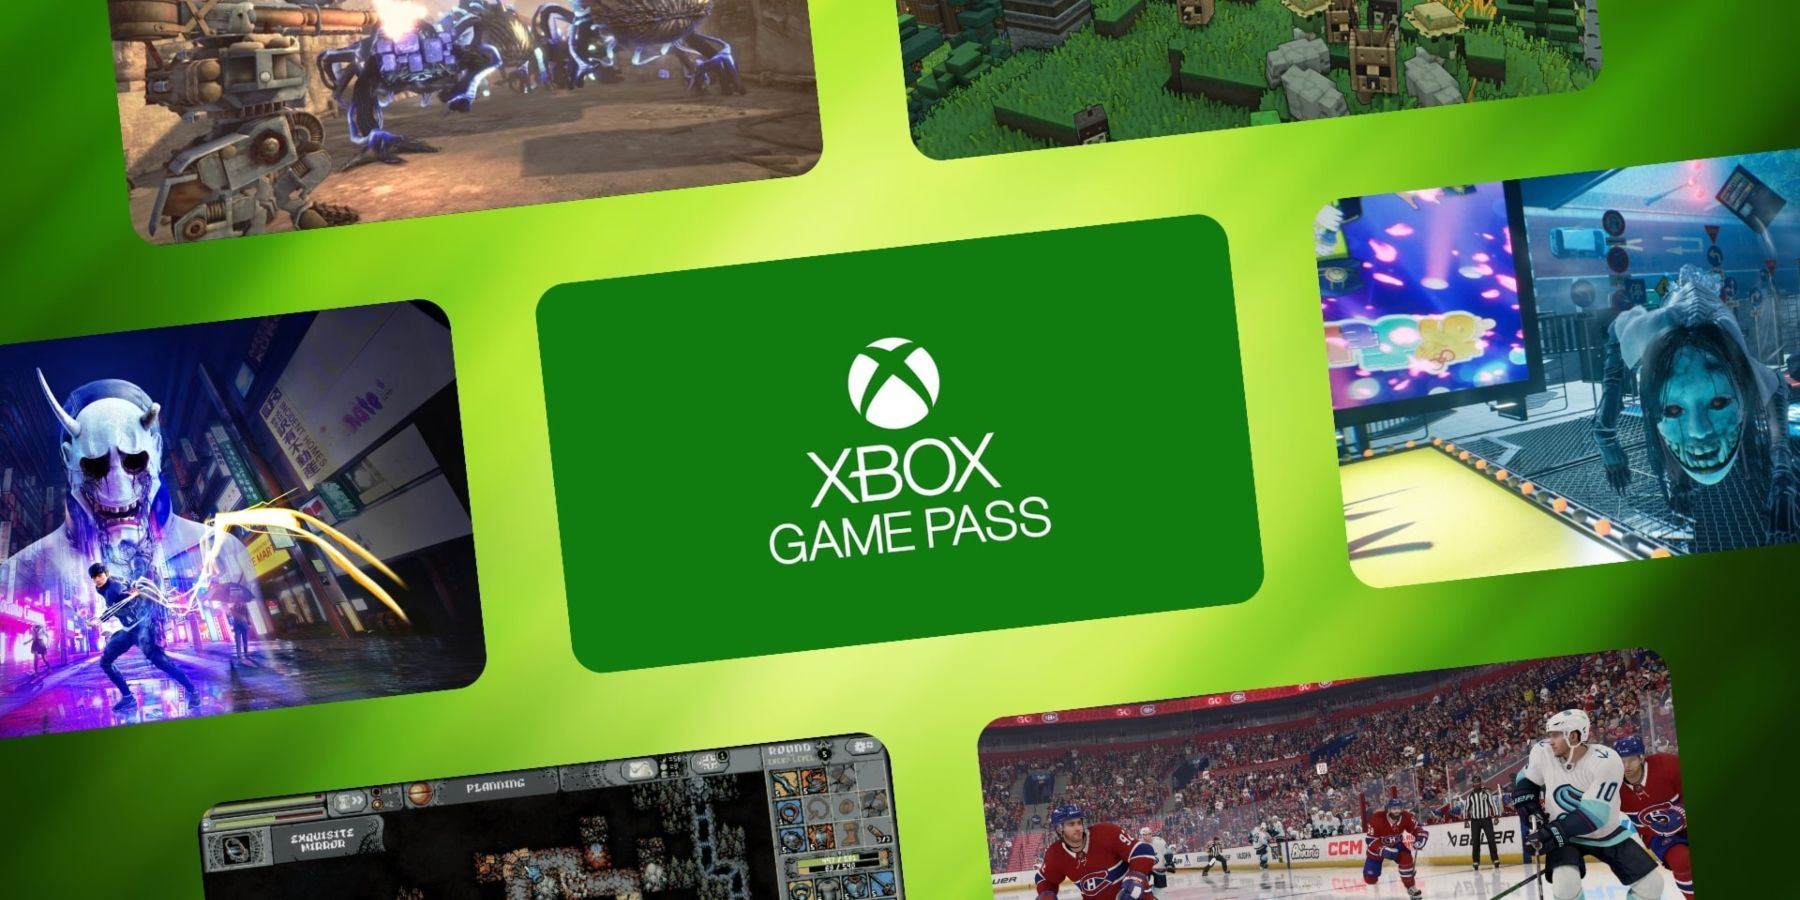 Loop Hero, NHL 23, Ghostwire: Tokyo, and More Coming to Game Pass